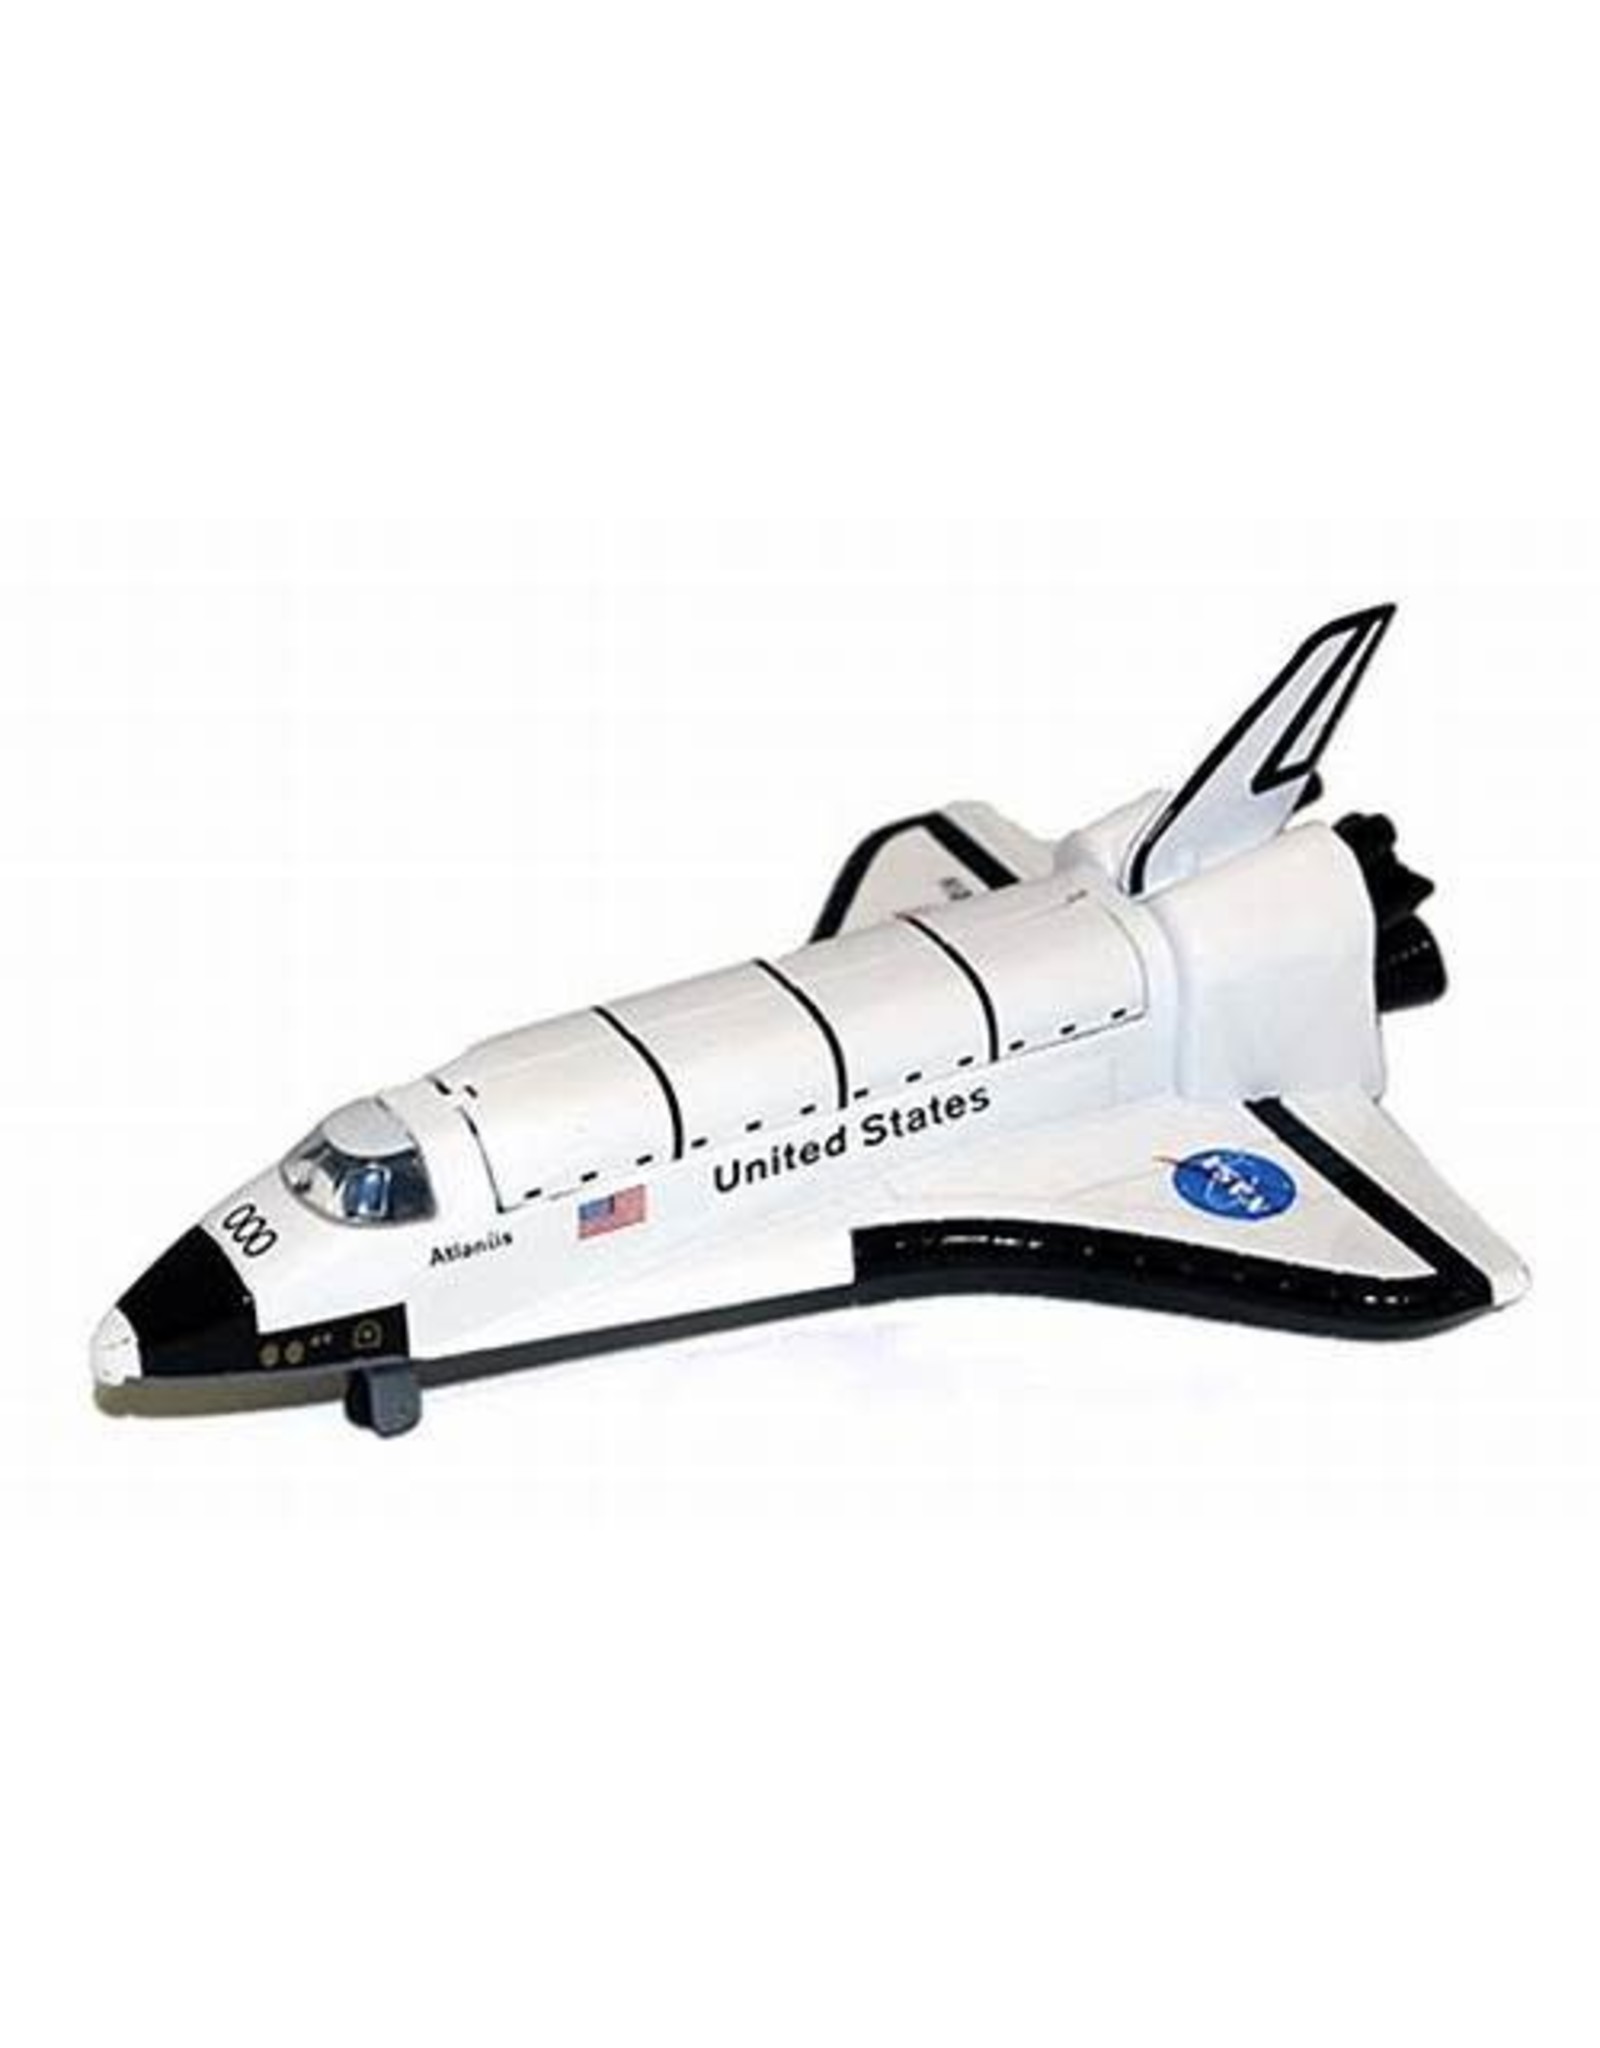 space shuttle discovery toy